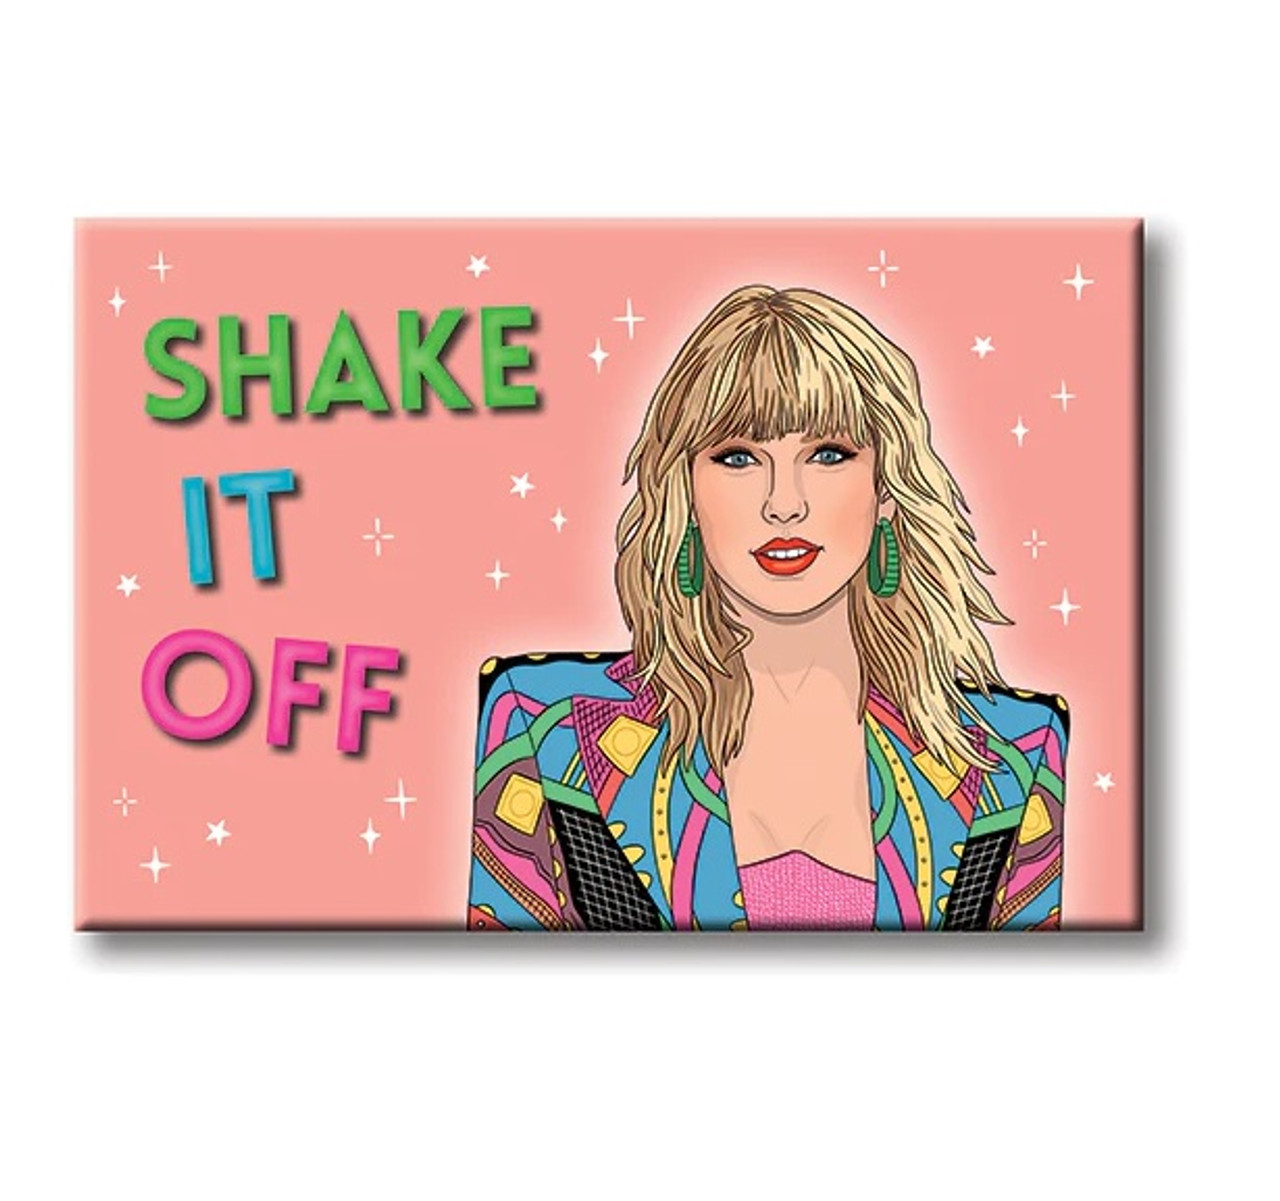 https://cdn11.bigcommerce.com/s-c9a80/images/stencil/1280x1280/products/18287/69170/Taylor_Swift_Shake_it_Off_Magnet__75160.1701912778.jpg?c=2